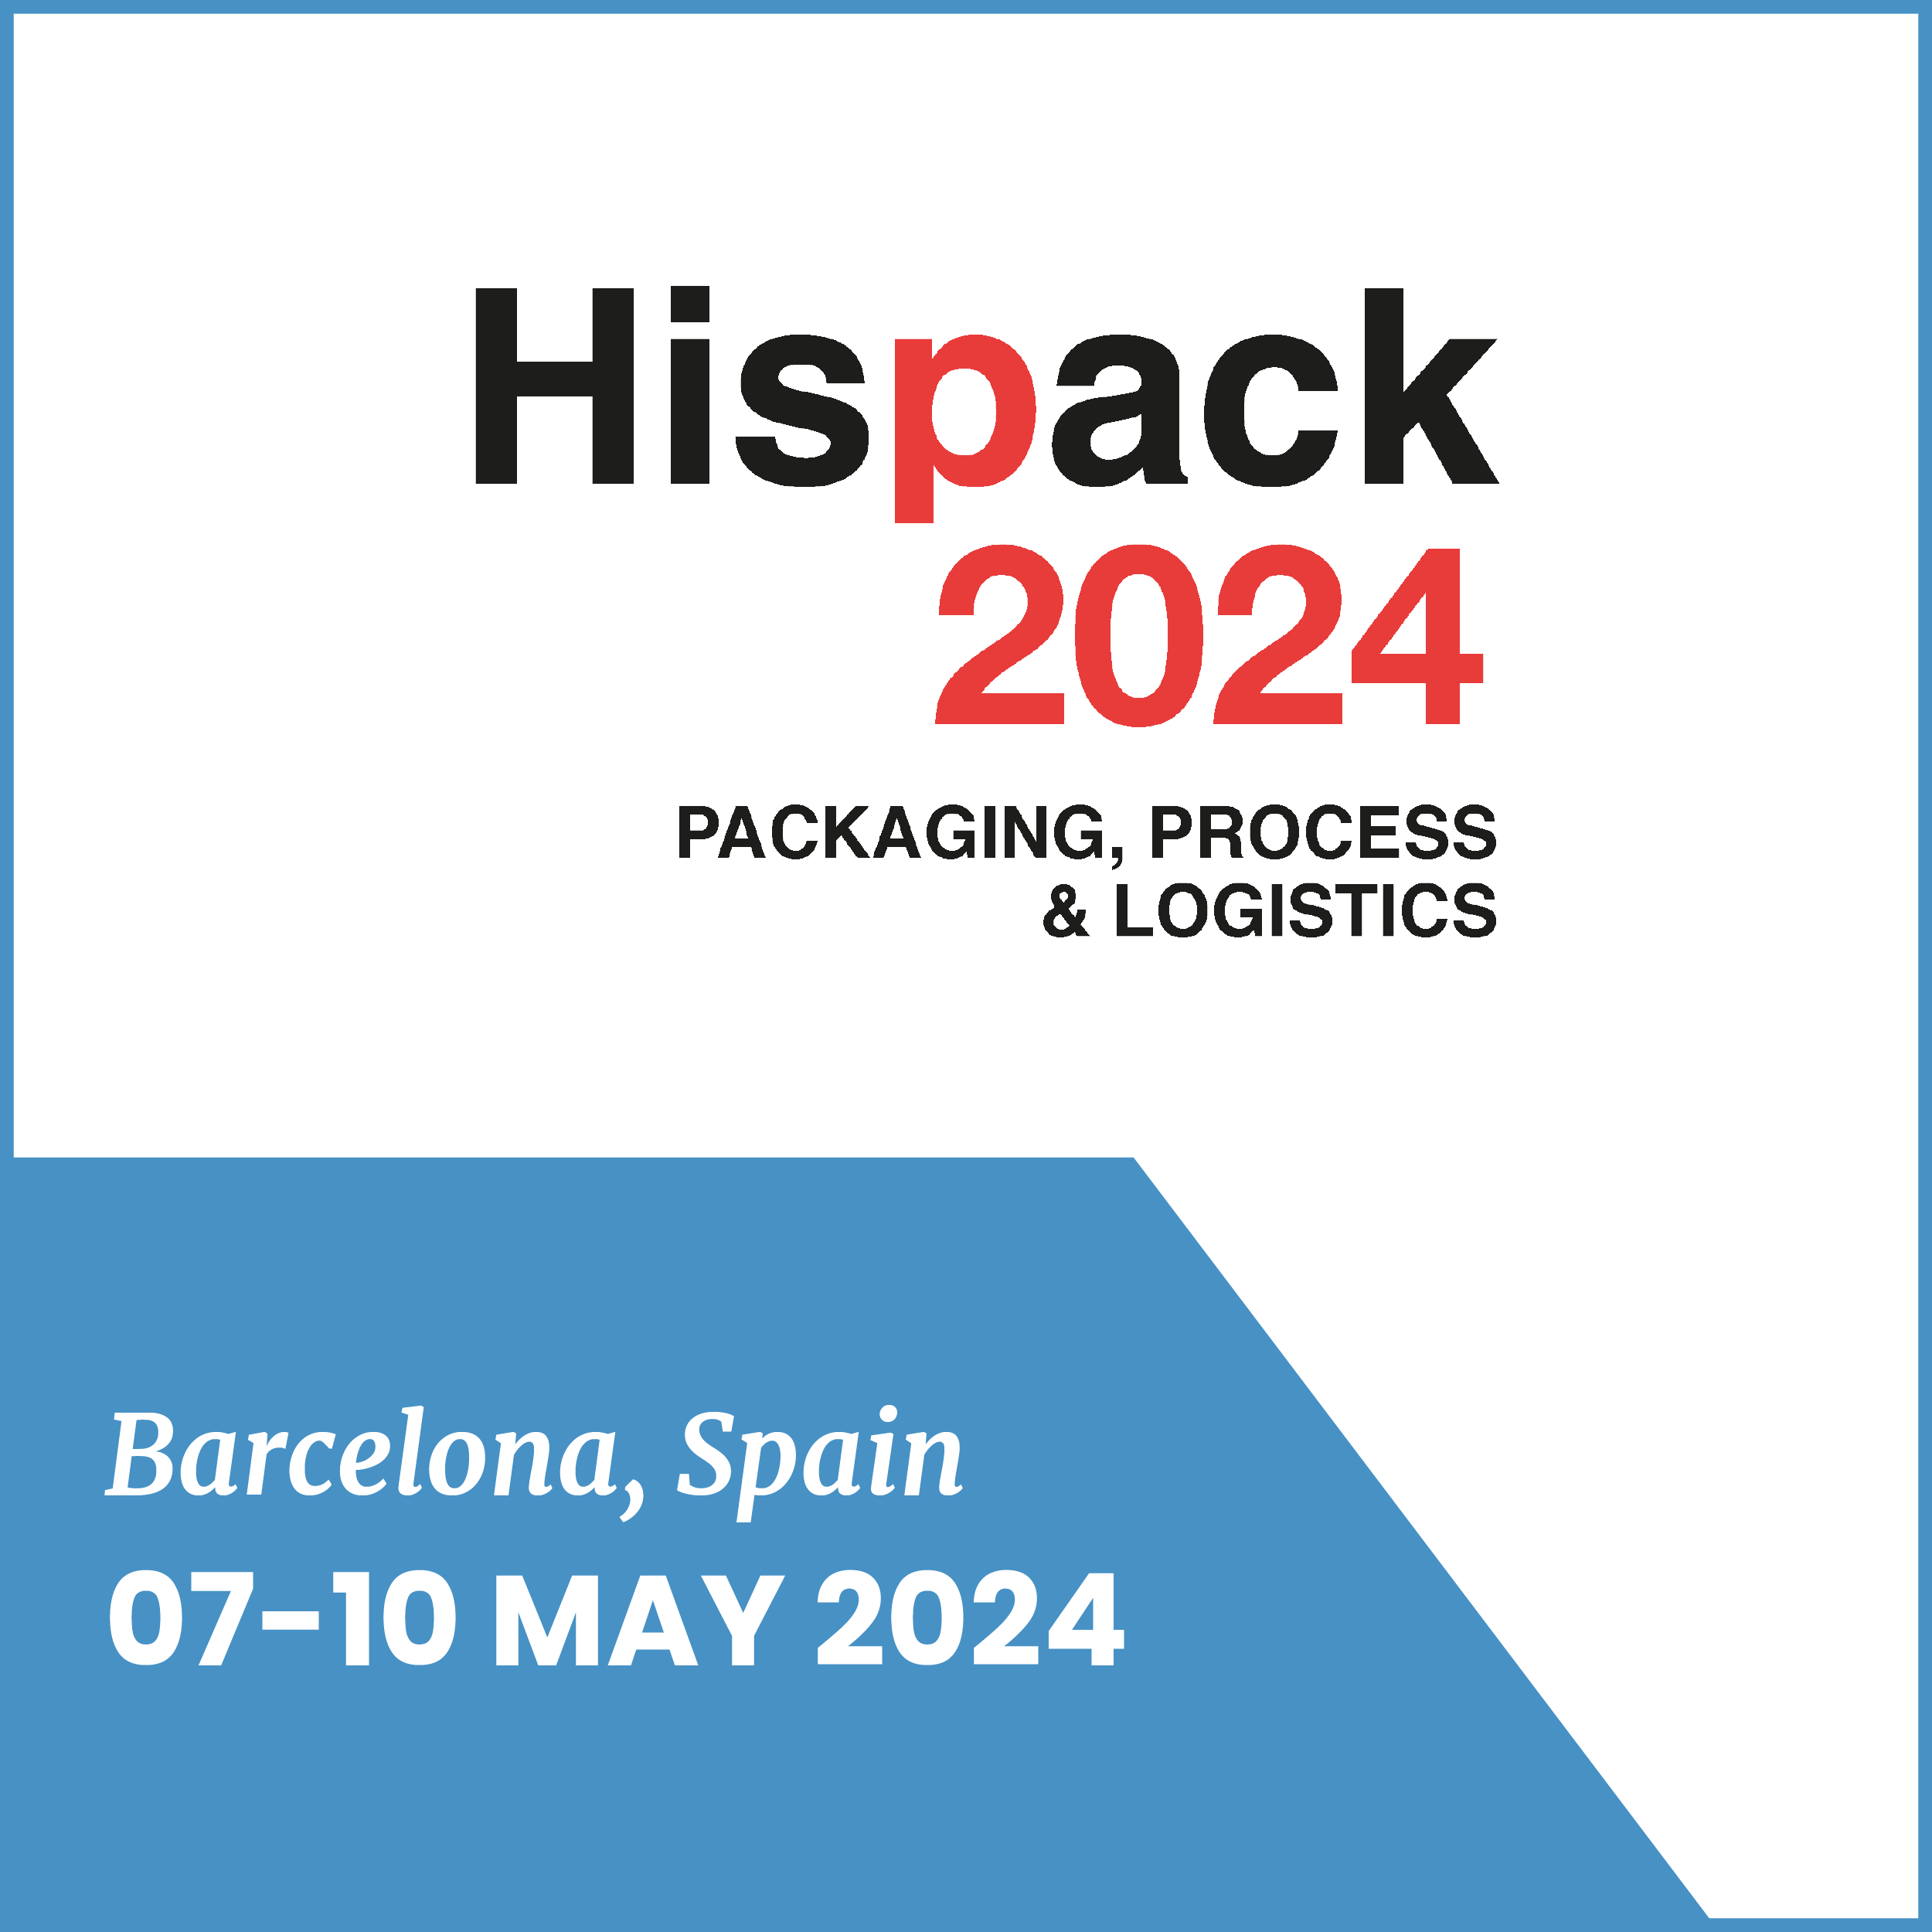 Teaser of Hispack event in Barcelona, Spain. From 07-10 May, 2024